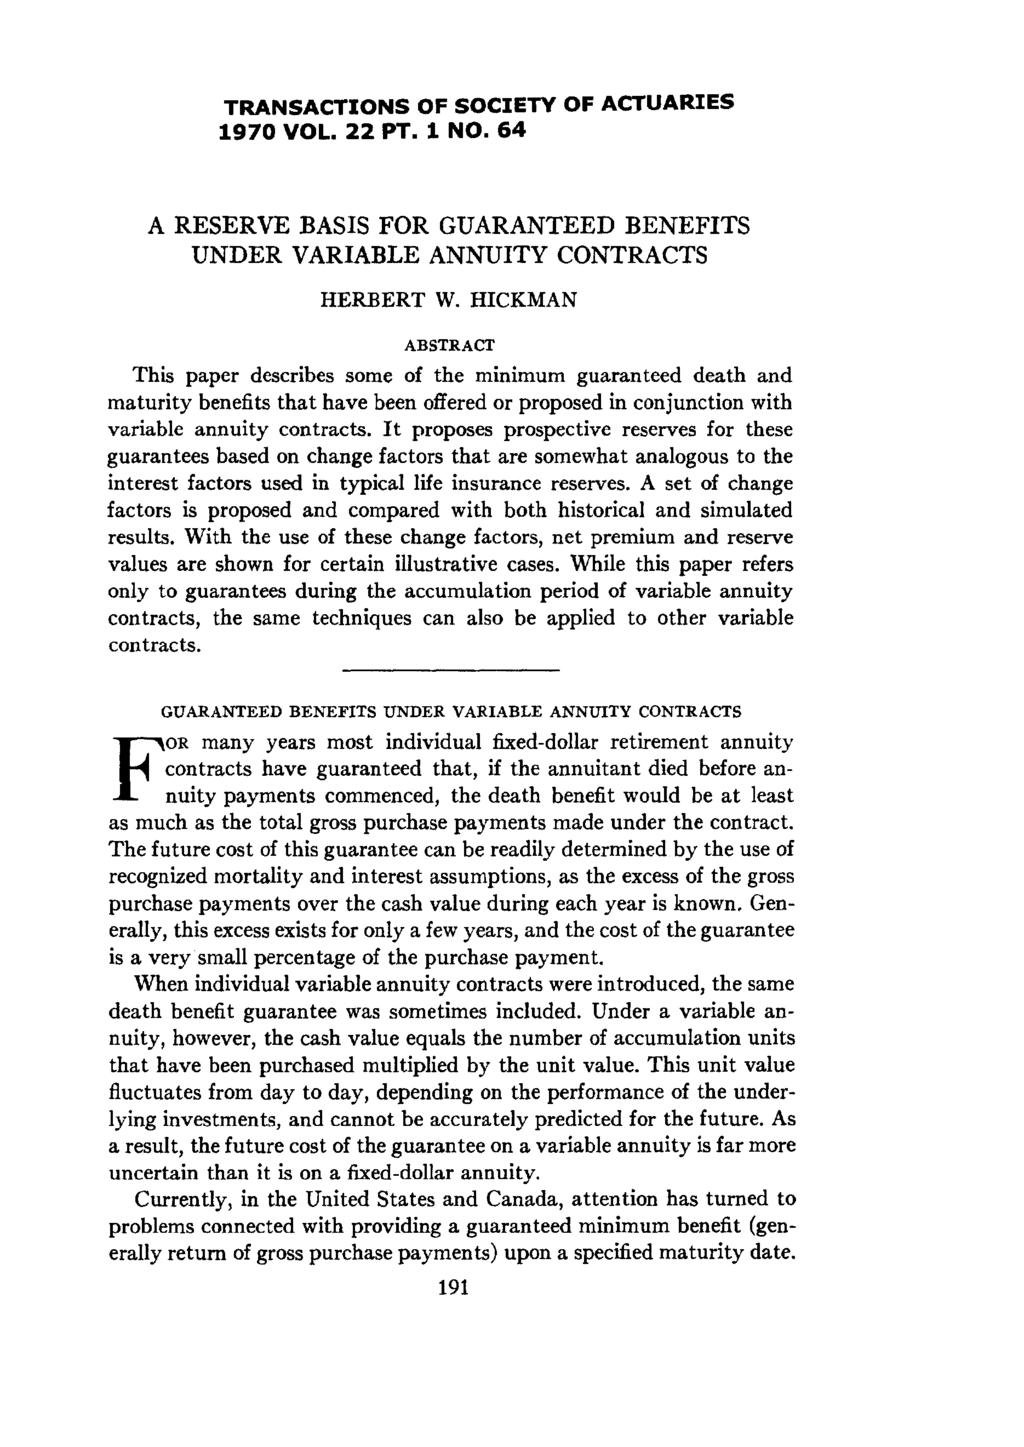 TRANSACTIONS OF SOCIETY OF ACTUARIES 197 VOL. 22 PT. 1 NO. 64 A RESERVE BASIS FOR GUARANTEED BENEFITS UNDER VARIABLE ANNUITY CONTRACTS HERBERT W.